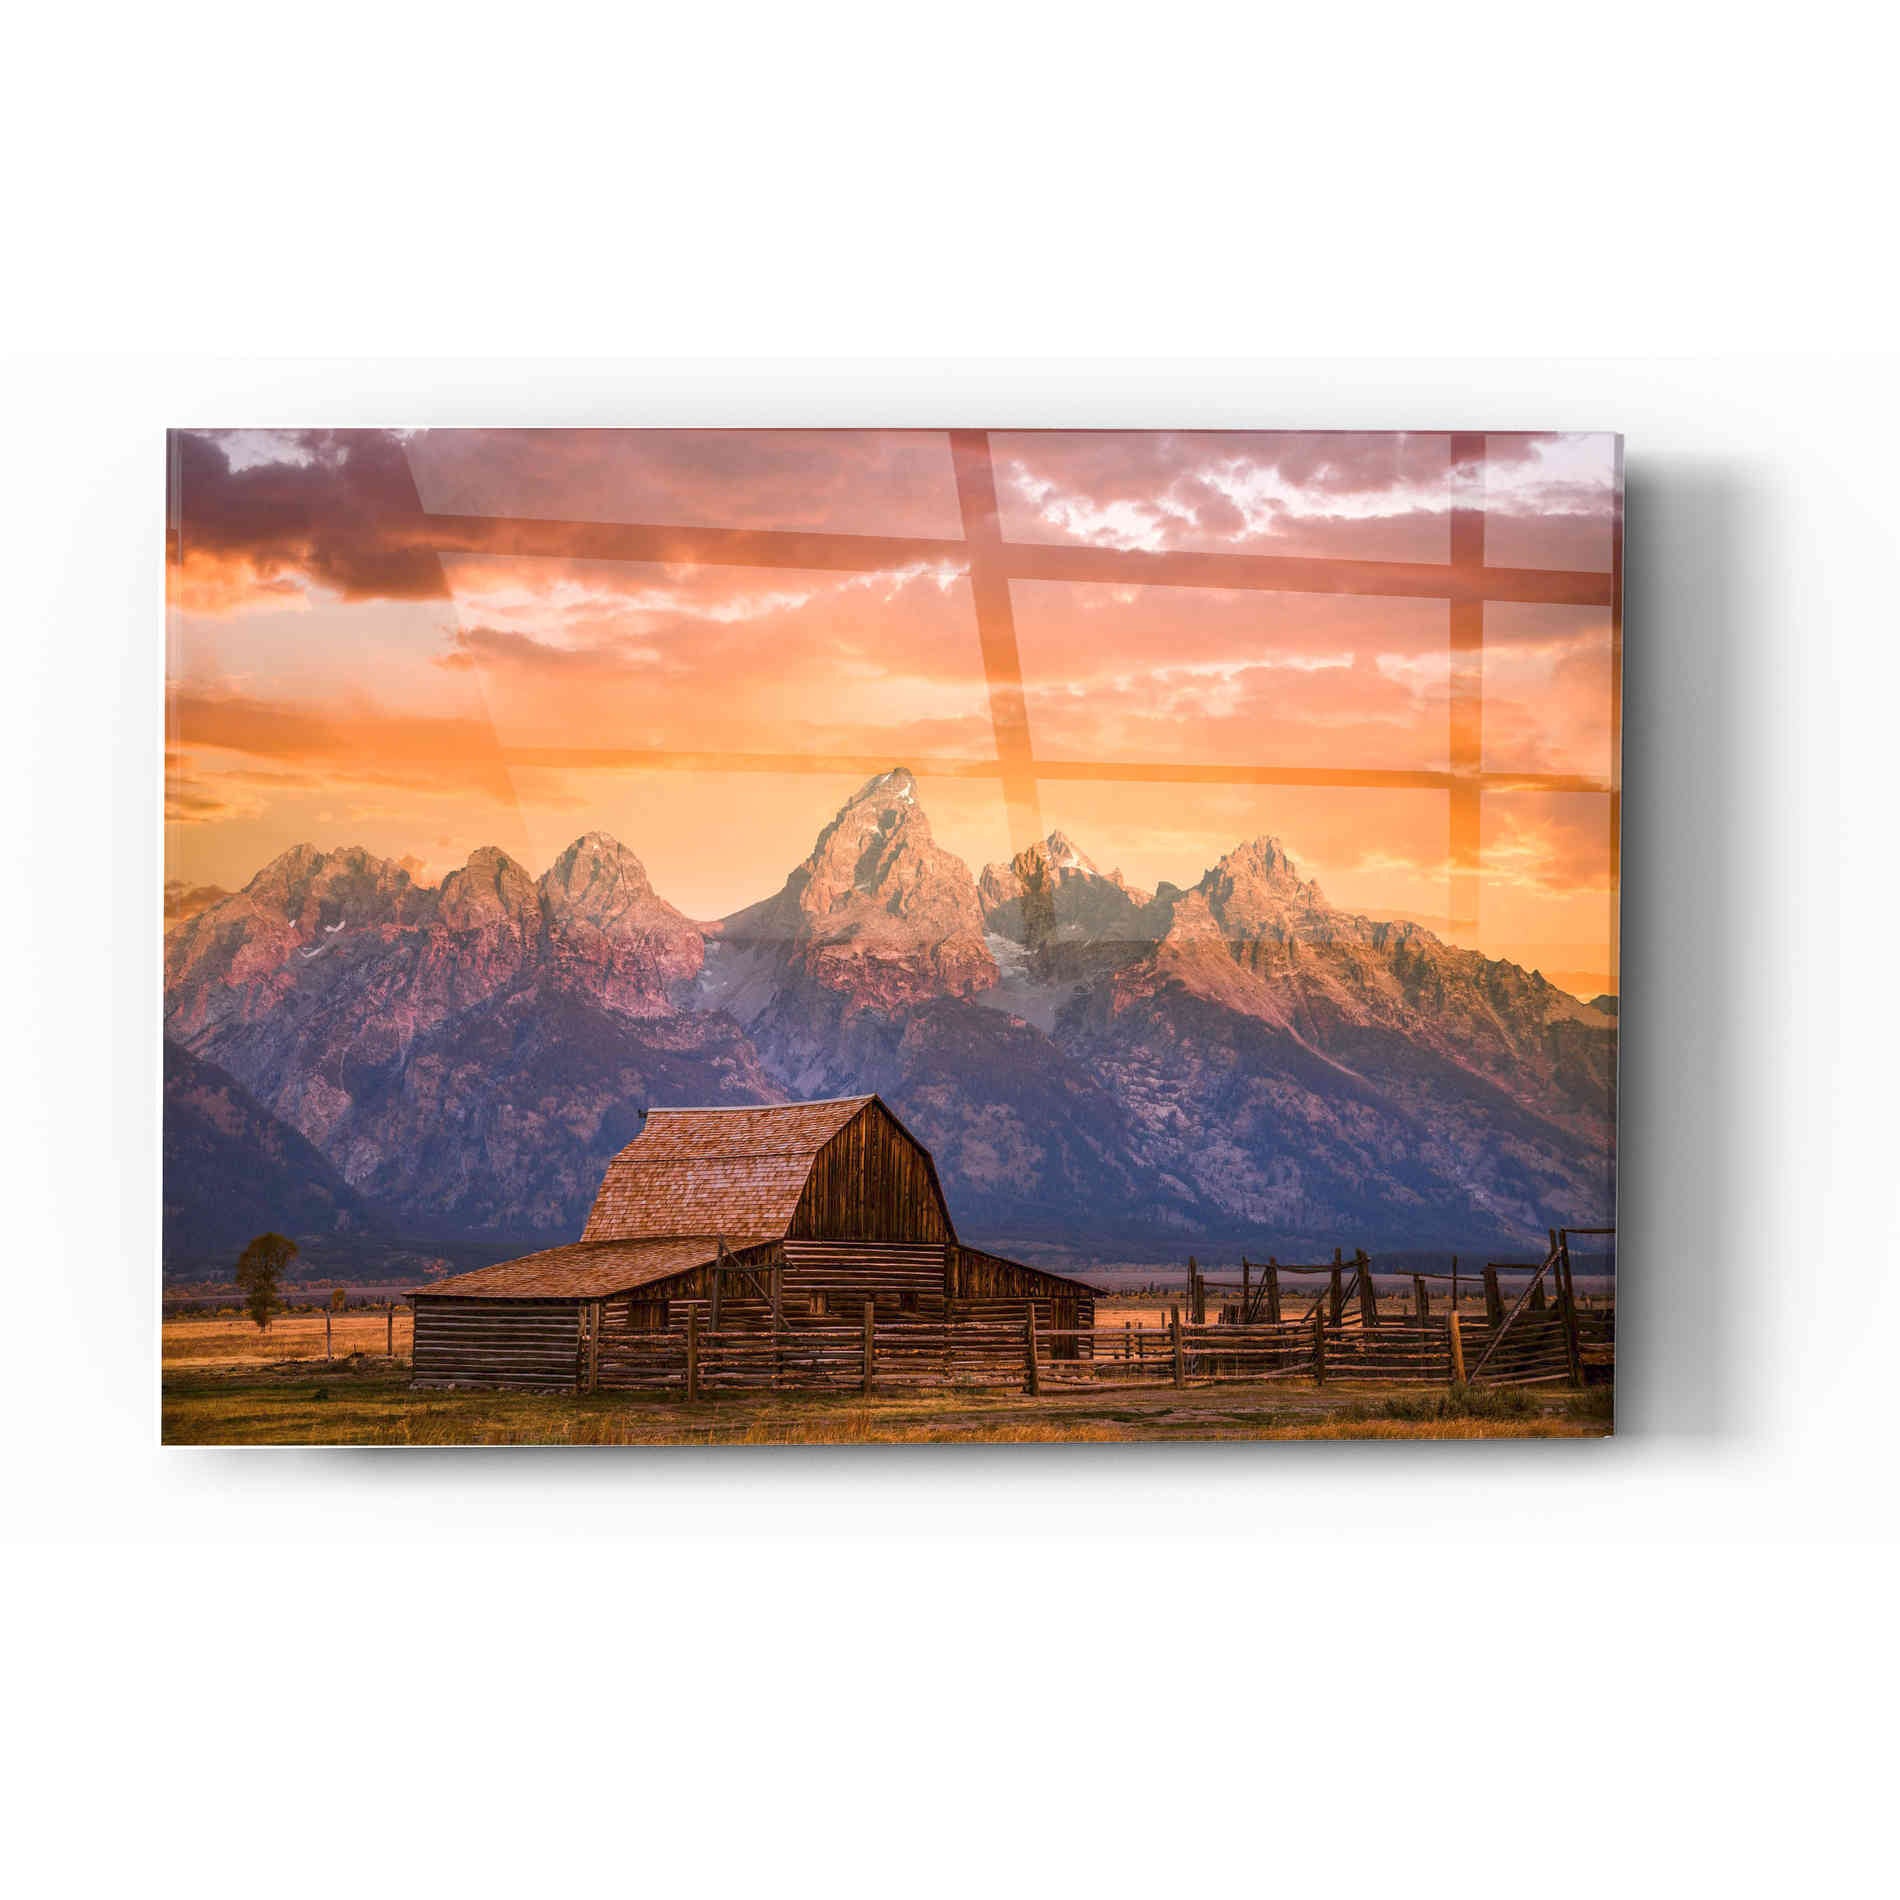 Epic Art "Sunrise on the Ranch" by Darren White, Acrylic Glass Wall Art,12x16